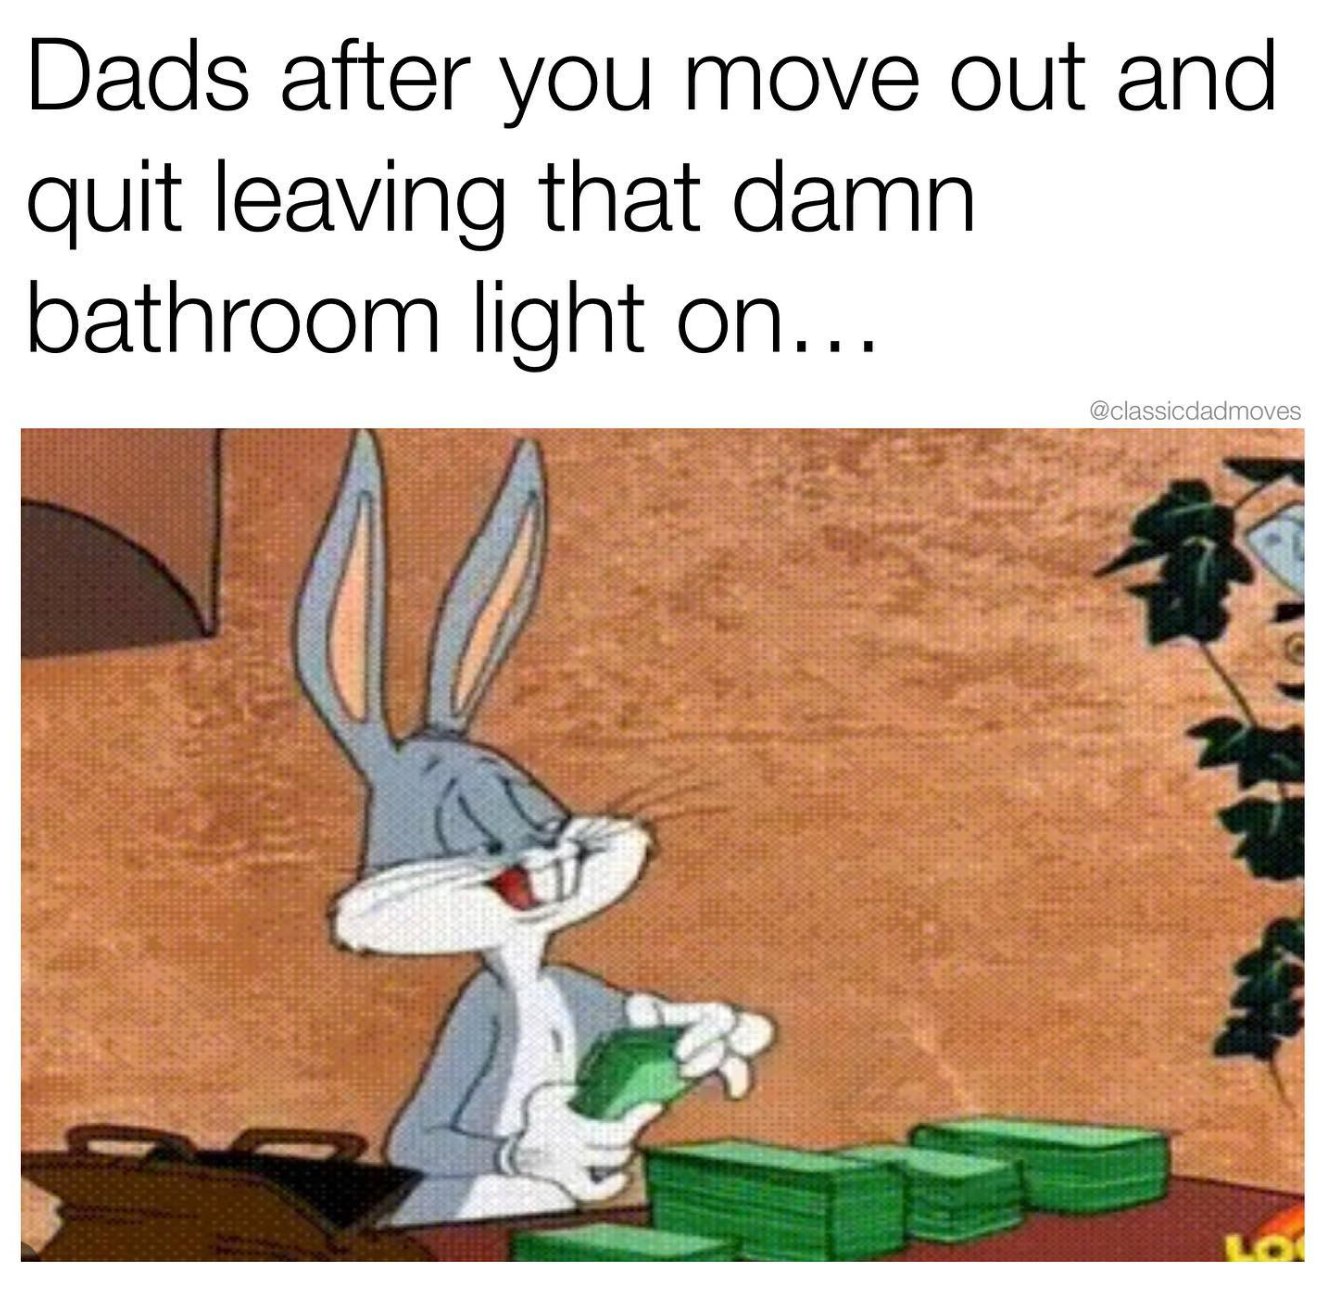 dads after you move out and quit leaving that damn bathroom light on, bugs bunny counting cash